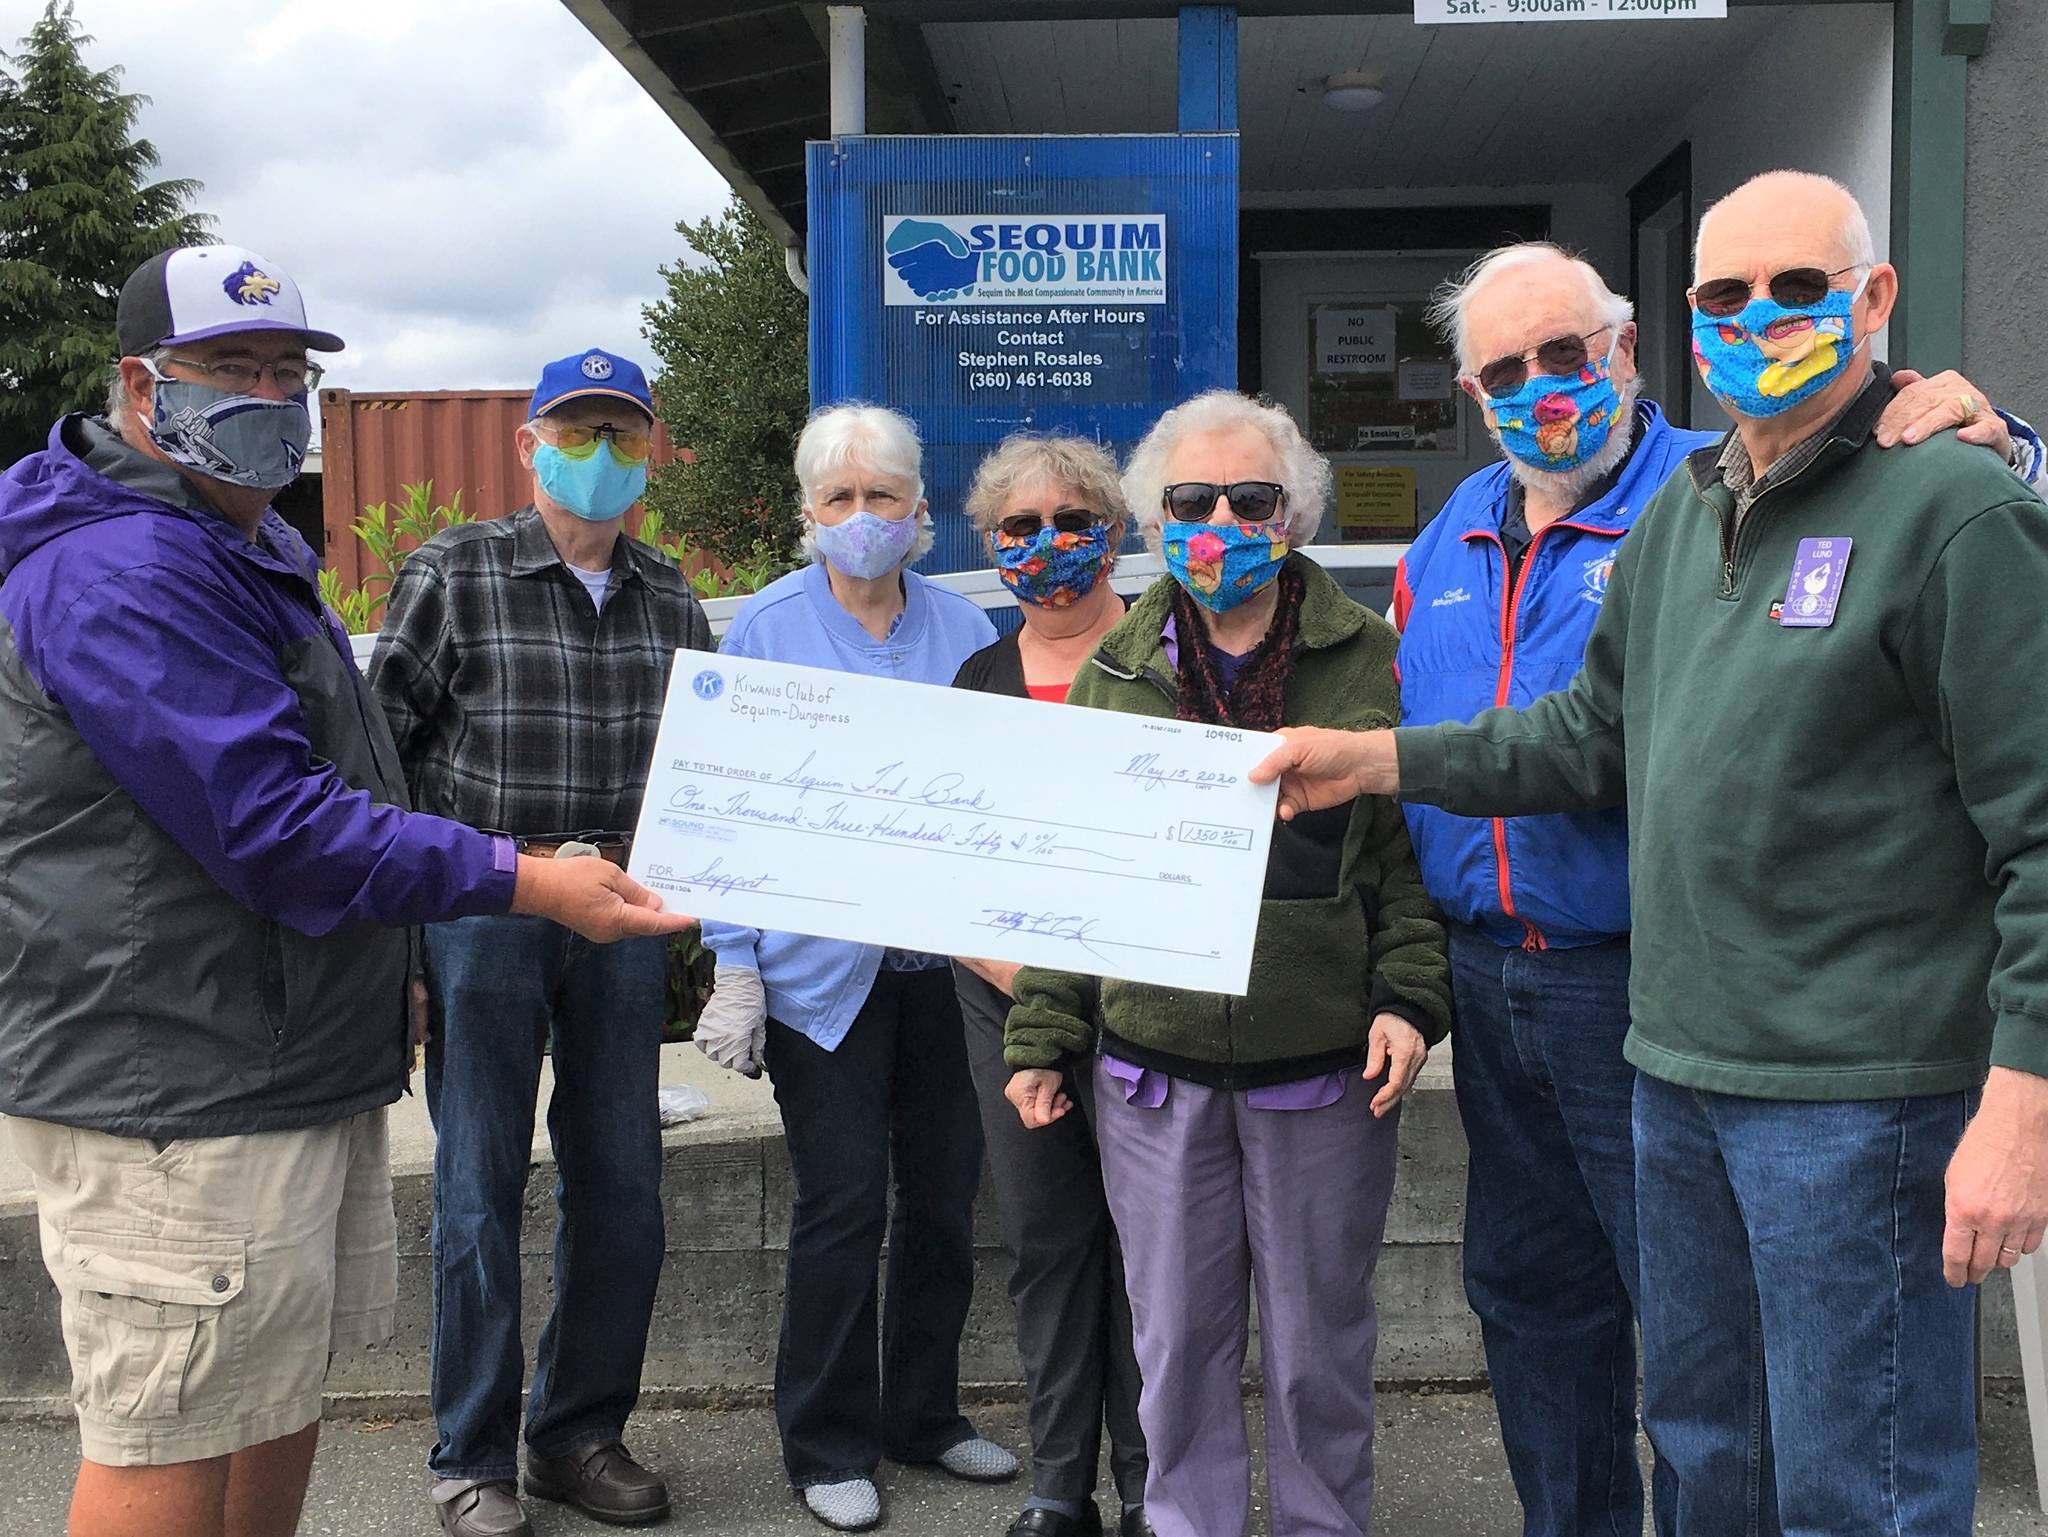 At right, Ted Lund, treasurer of the Kiwanis Club of Sequim-Dungeness, presents a donation to Stephen Rosales of the Sequim Food Bank (at far left). Also in attendance are, from second-to-left, club members Wayne Boden (president), Mary Boden, Philomena Lund (secretary), Janice Teeter and Richard Fleck (past president). Submitted photo